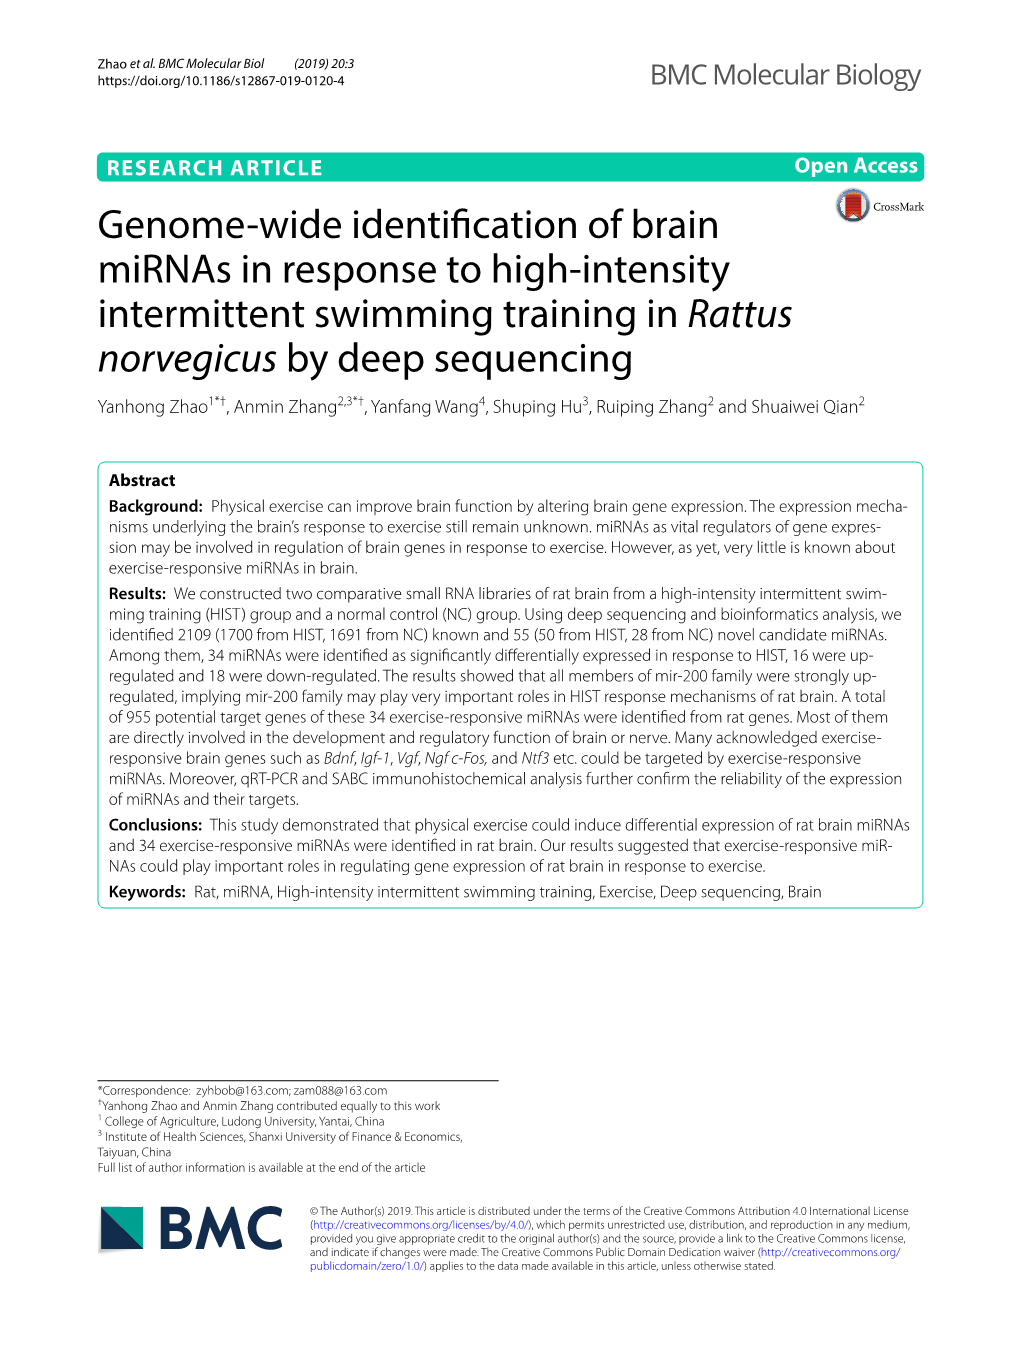 Genome-Wide Identification of Brain Mirnas in Response to High